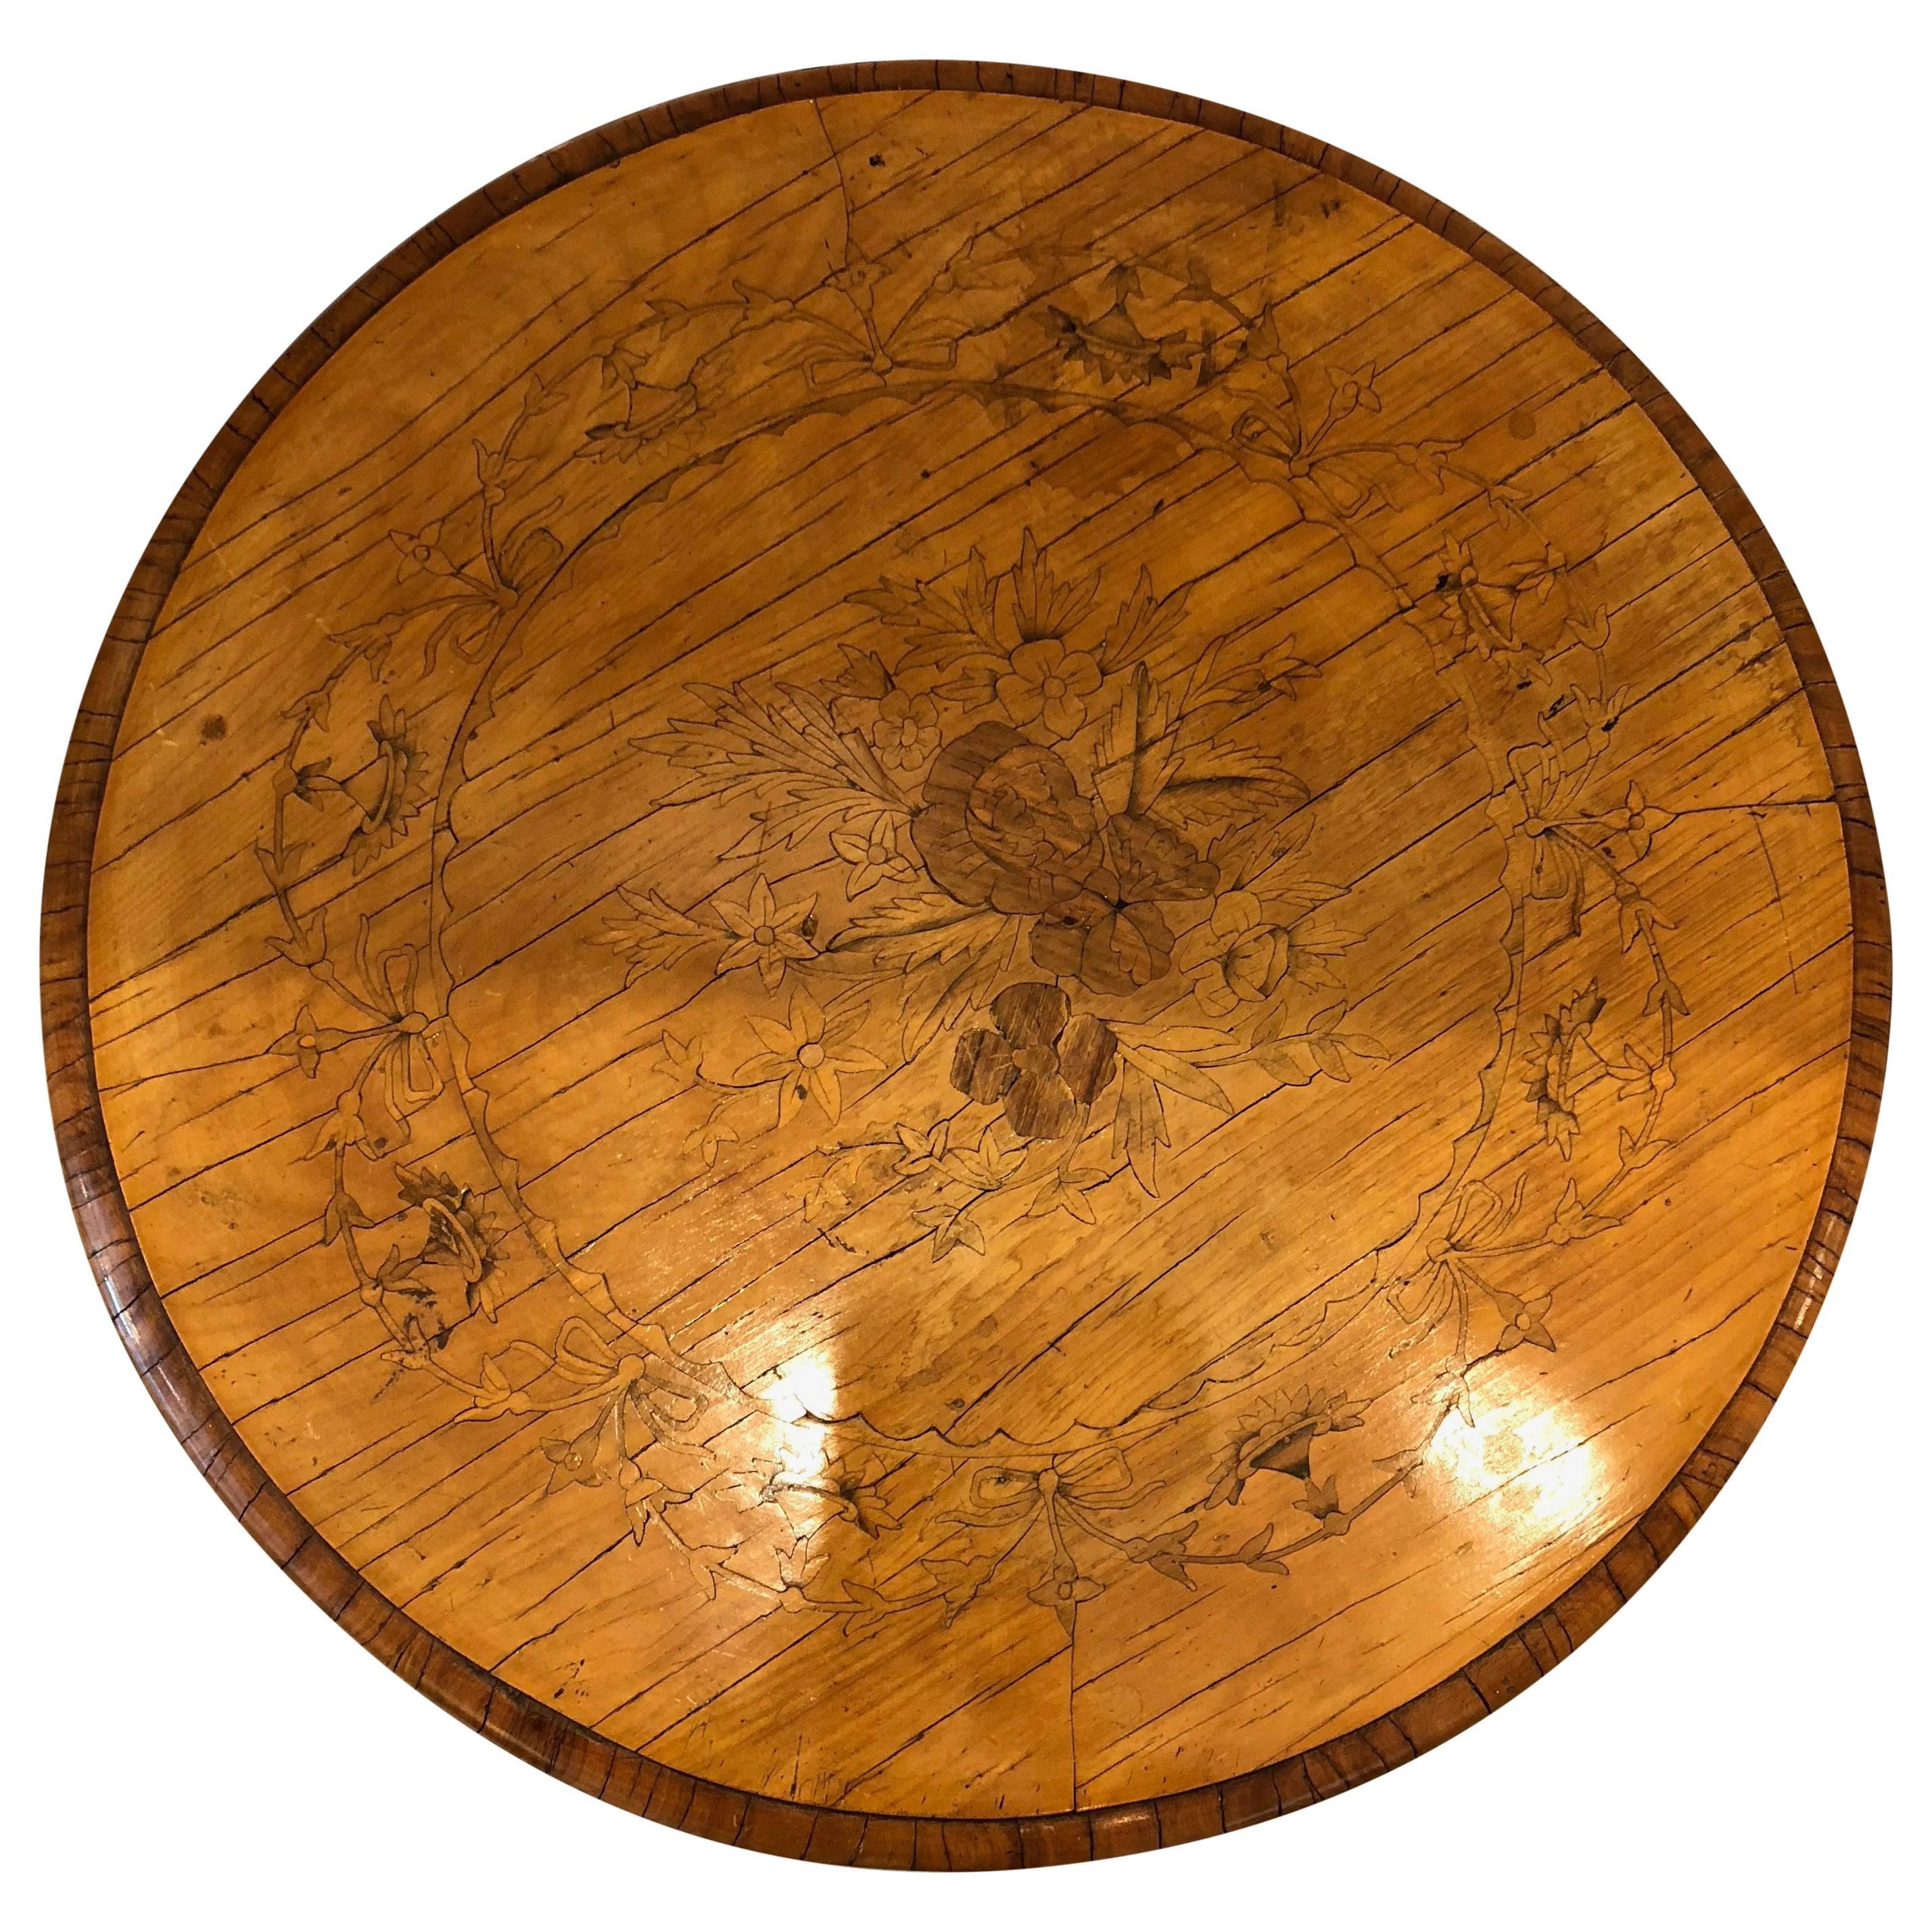 Antique Italian centre table with detailed marquetry. The top part of the table has floral and ribbon notes throughout.